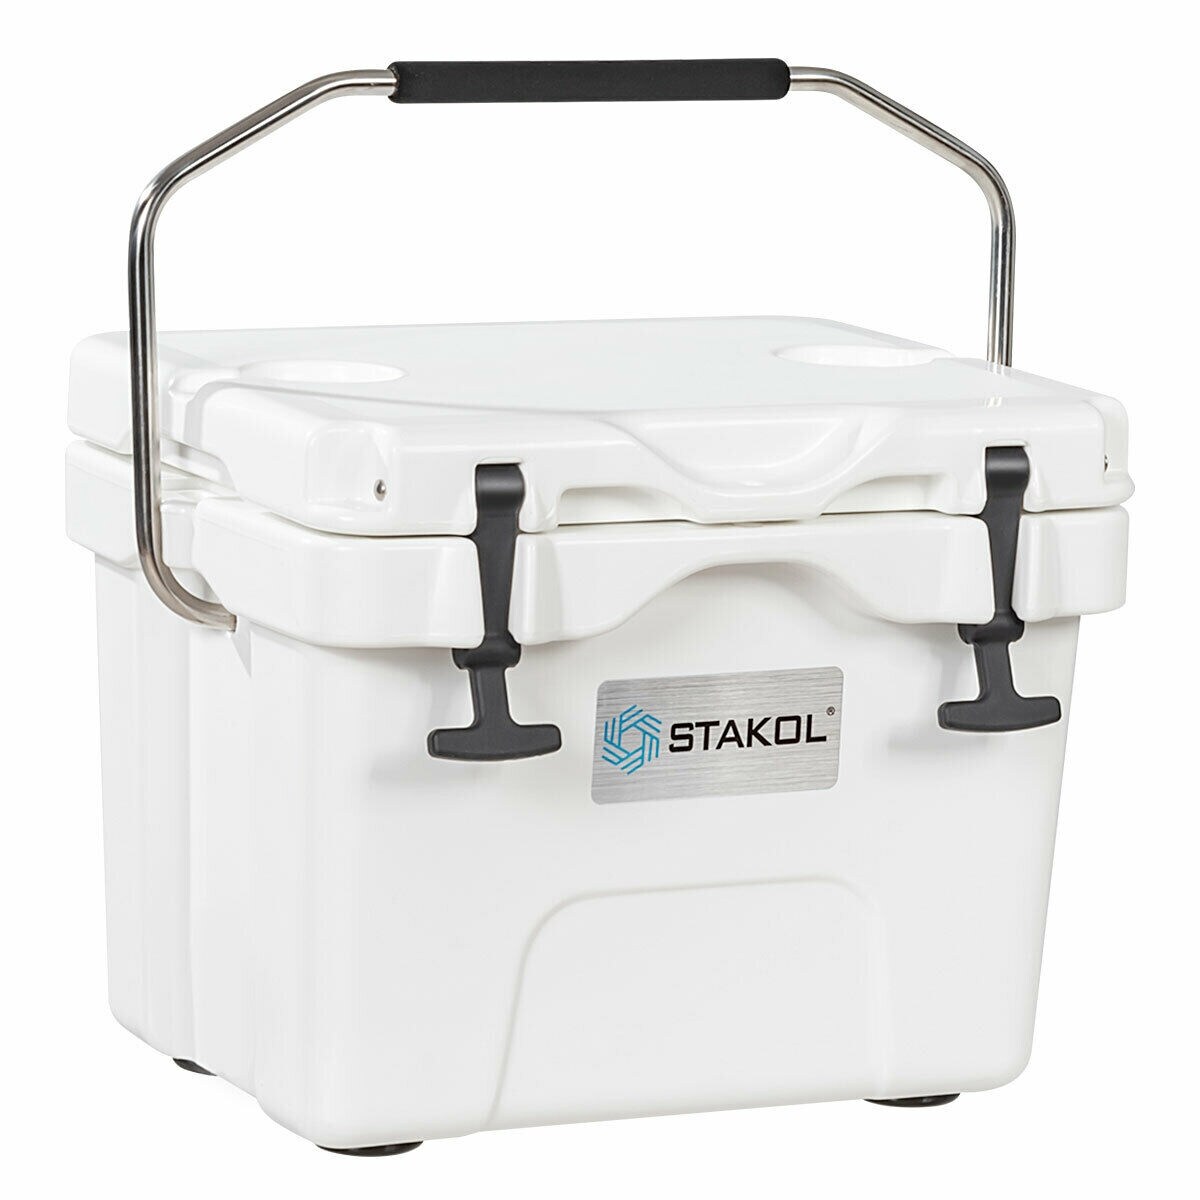 16 Quart 24-Can Capacity Portable Insulated Ice Cooler with 2 Cup Holders